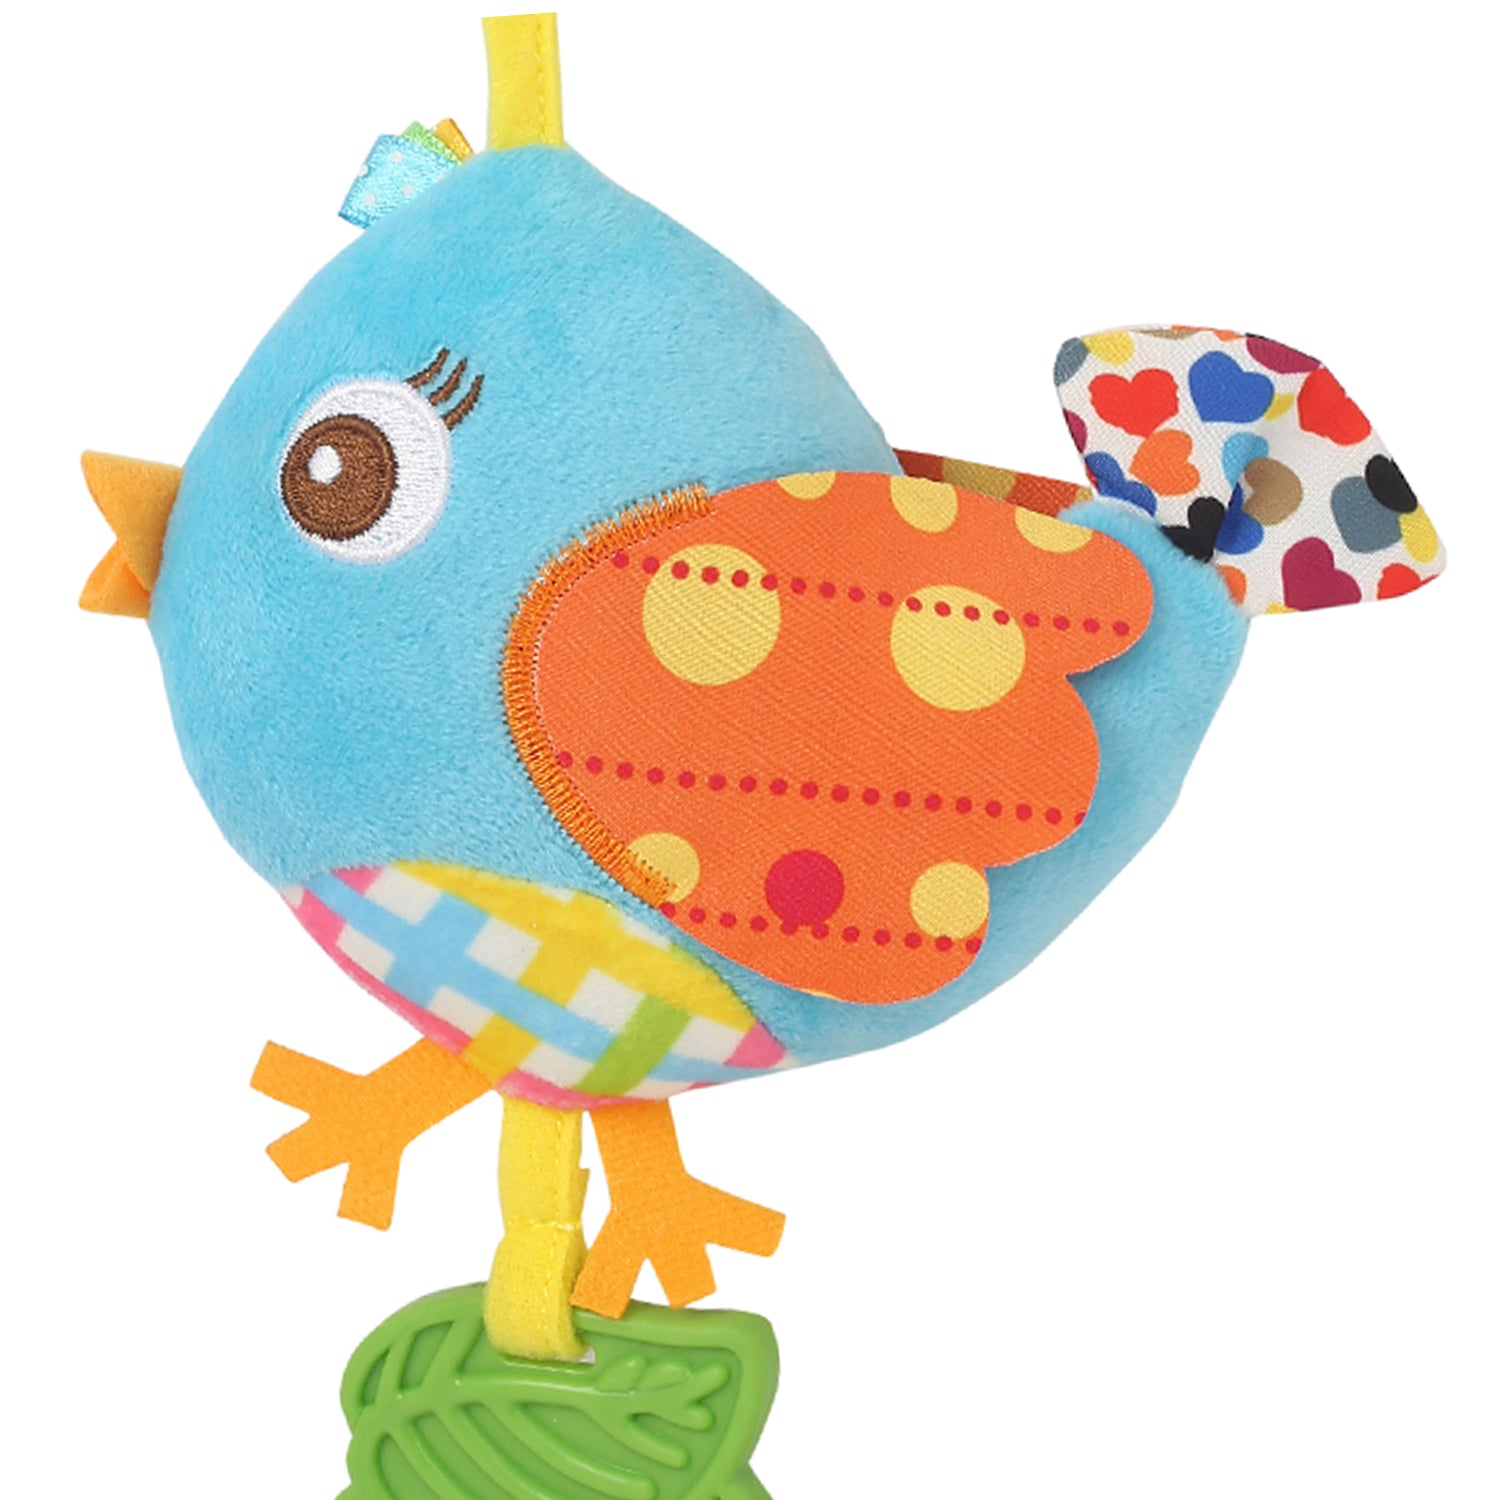 Chirpy Birdy Blue Hanging Musical Toy / Wind Chime With Teether - Baby Moo